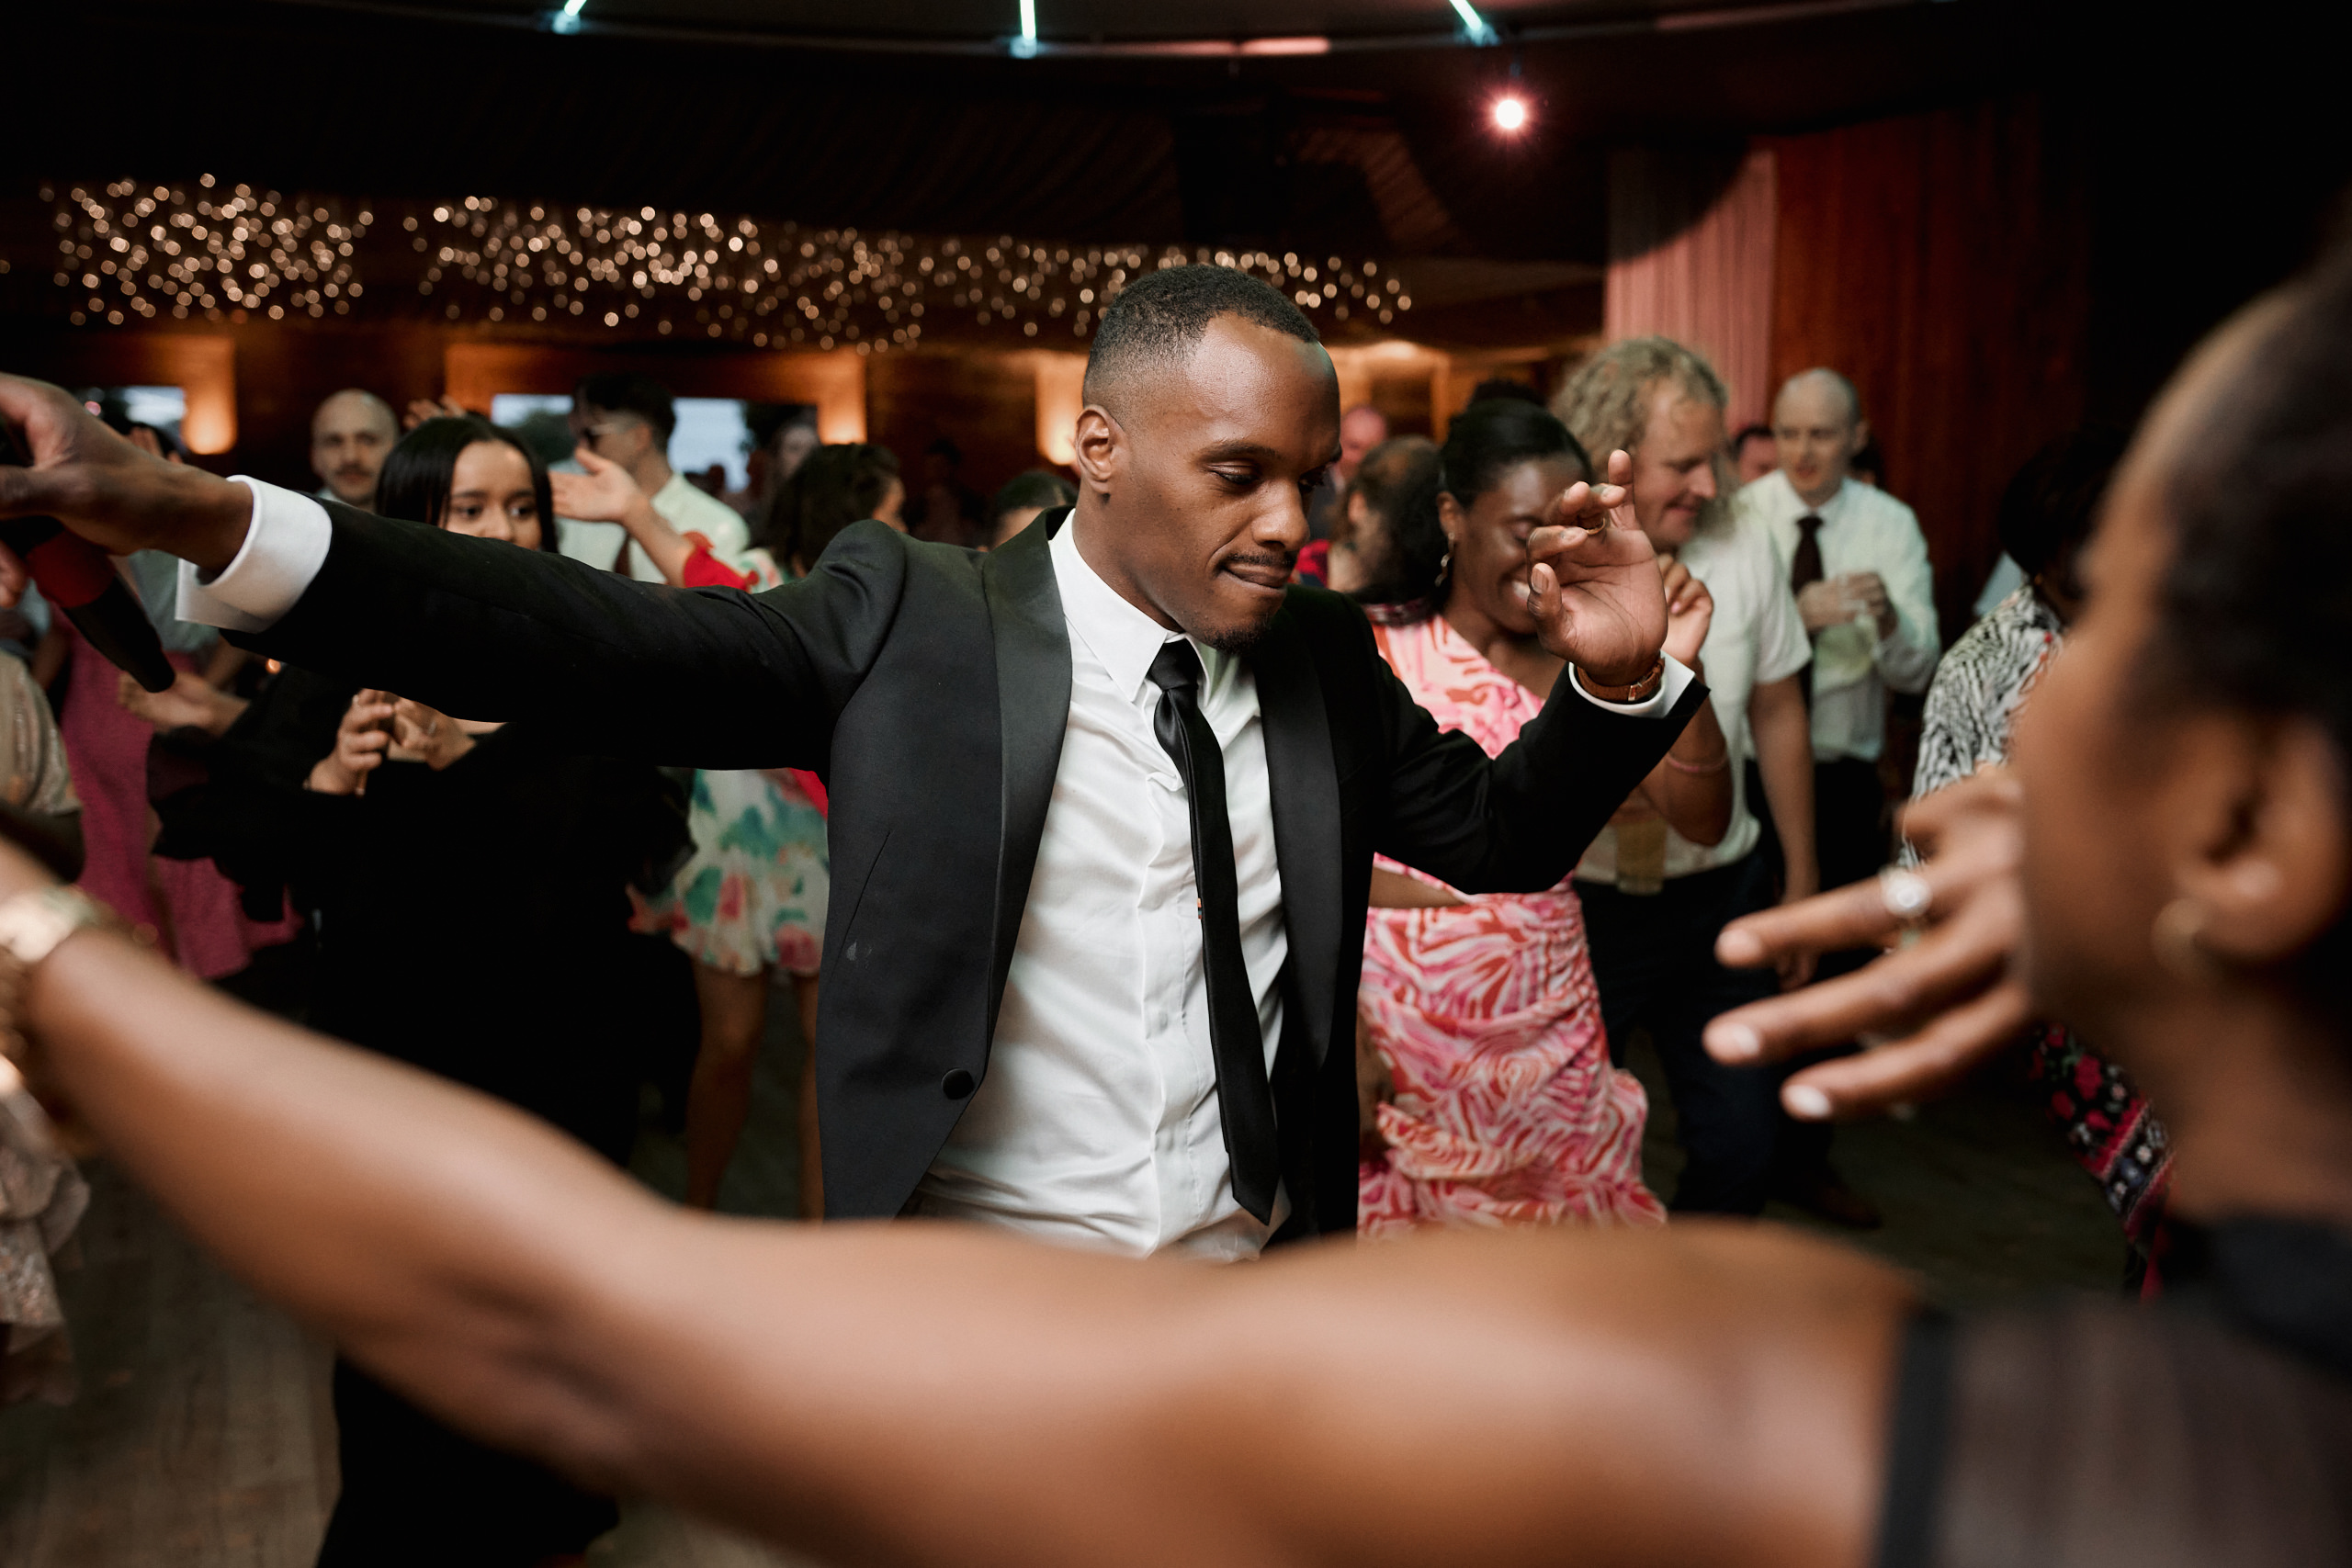 A guy and a girl are dancing at a wedding party.